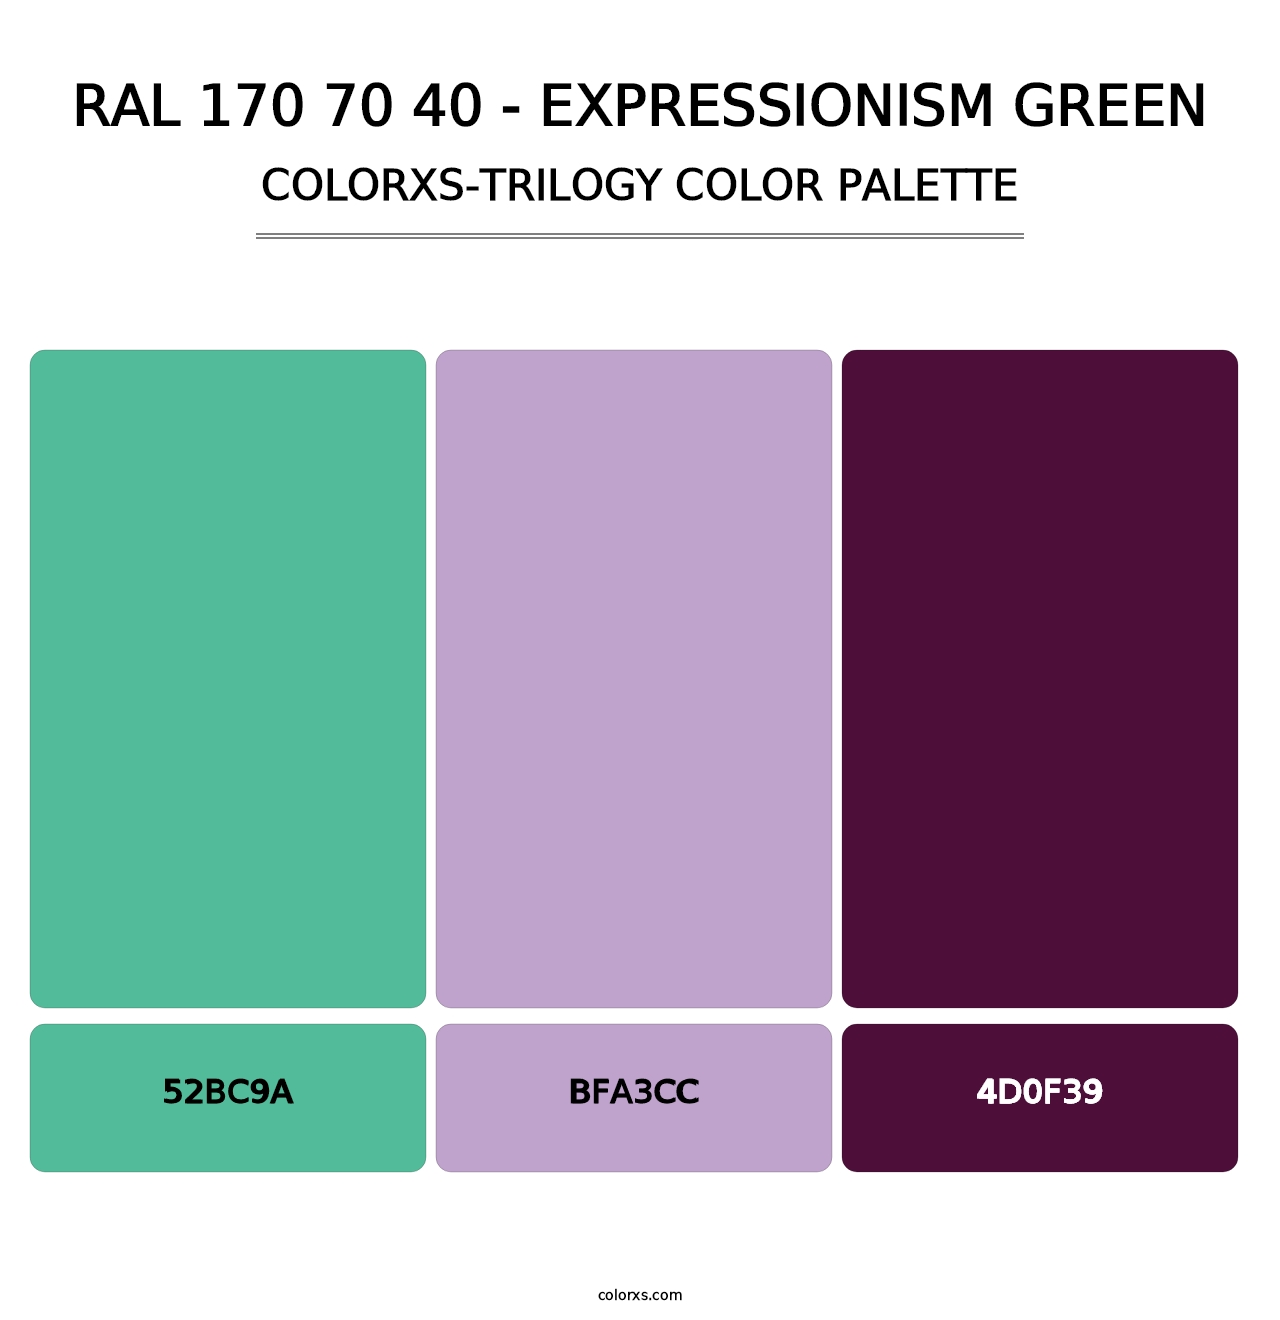 RAL 170 70 40 - Expressionism Green - Colorxs Trilogy Palette